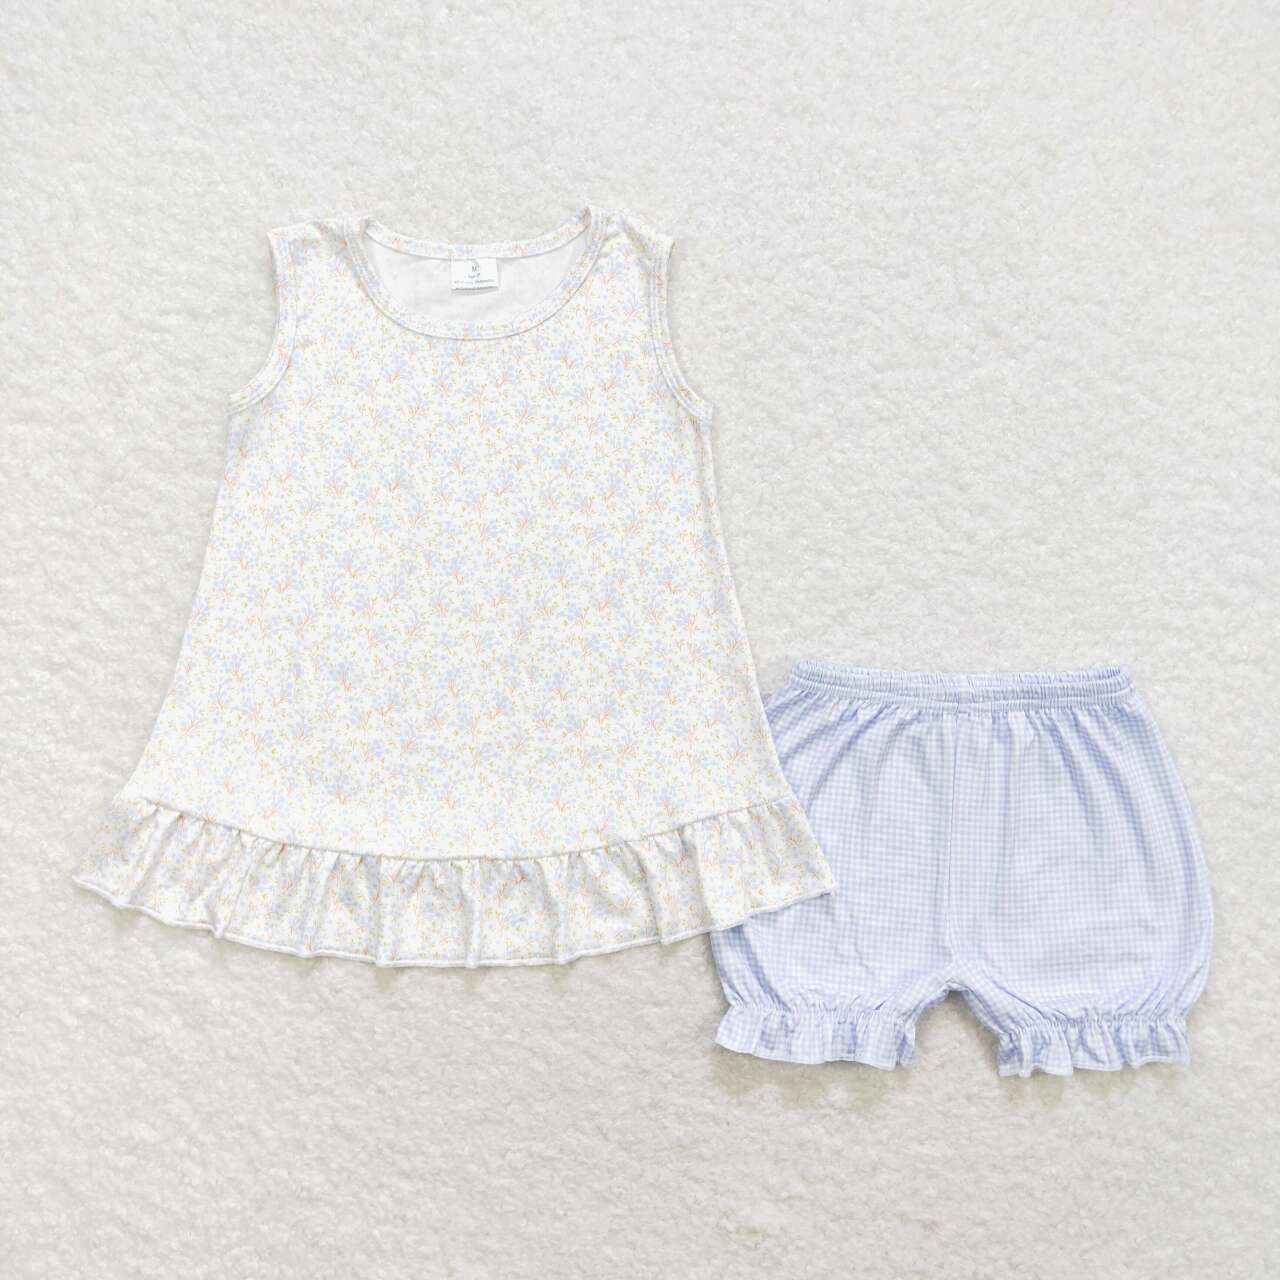 Small Flowers Print Sisters Summer Matching Clothes